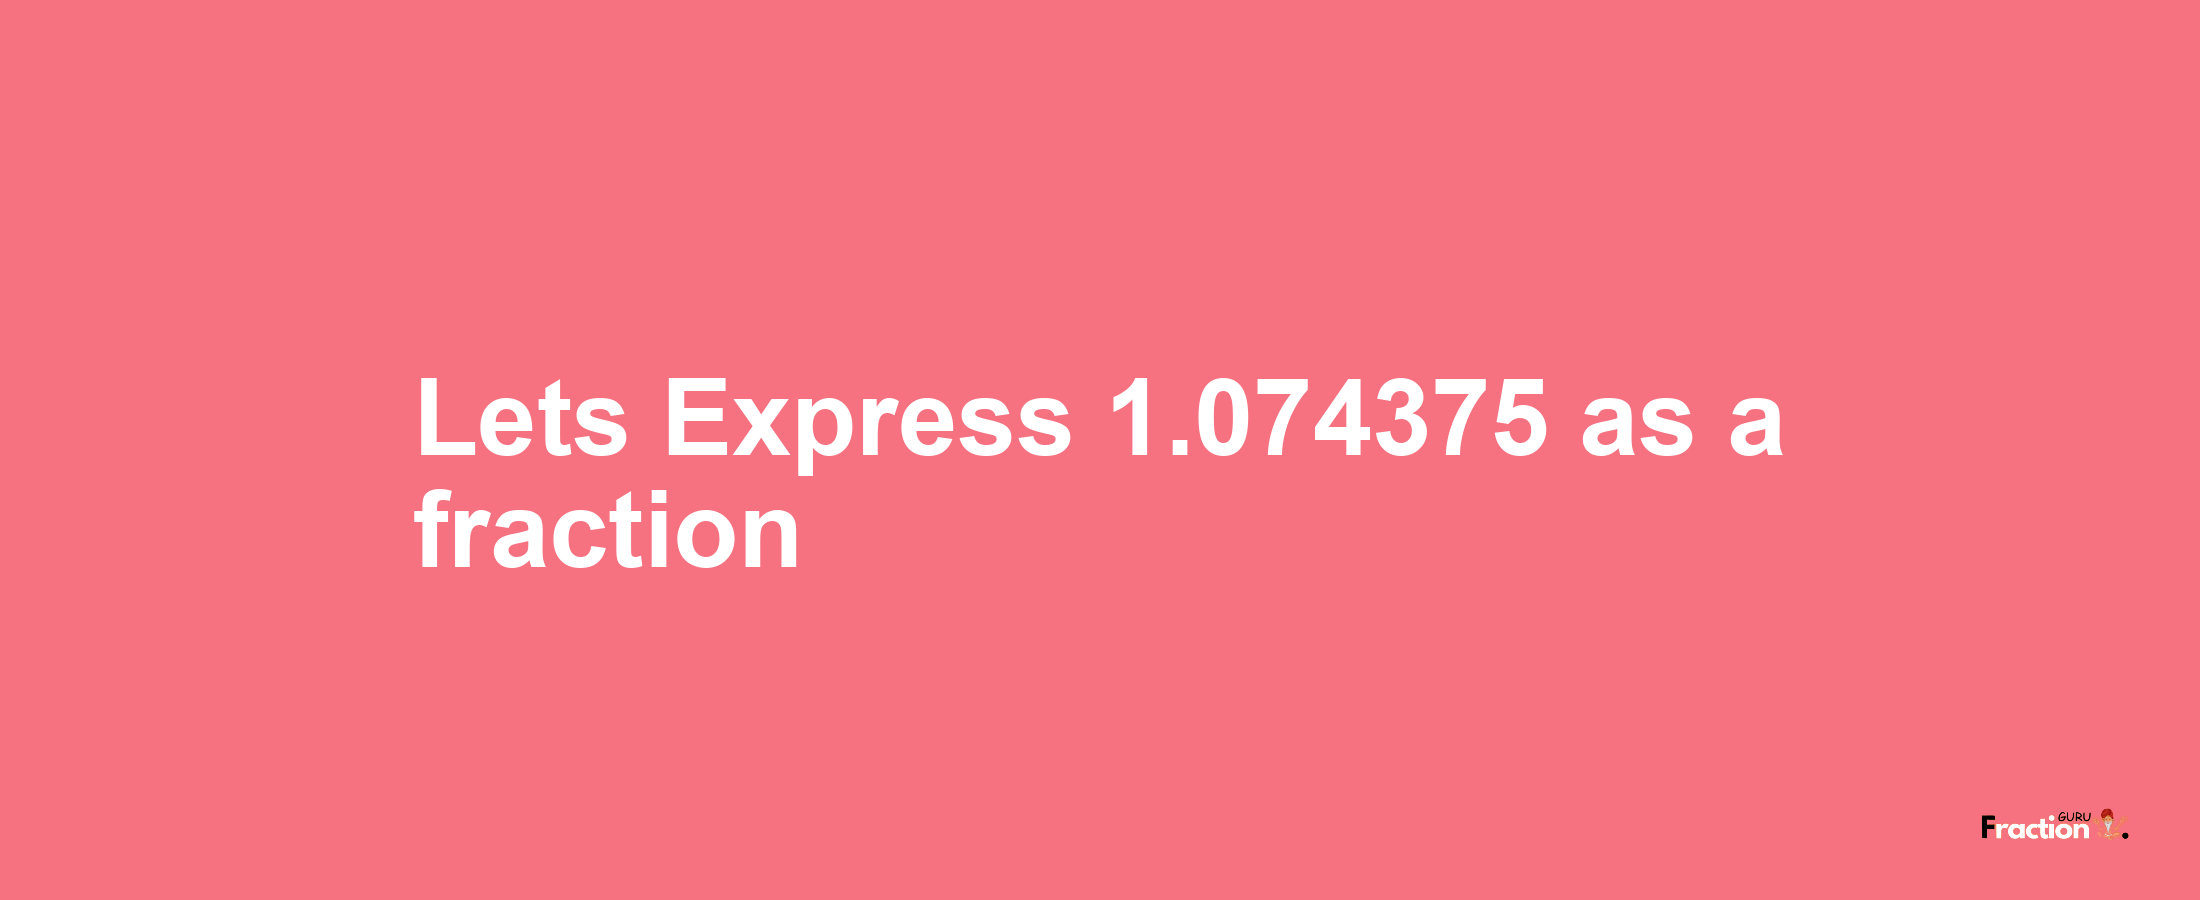 Lets Express 1.074375 as afraction